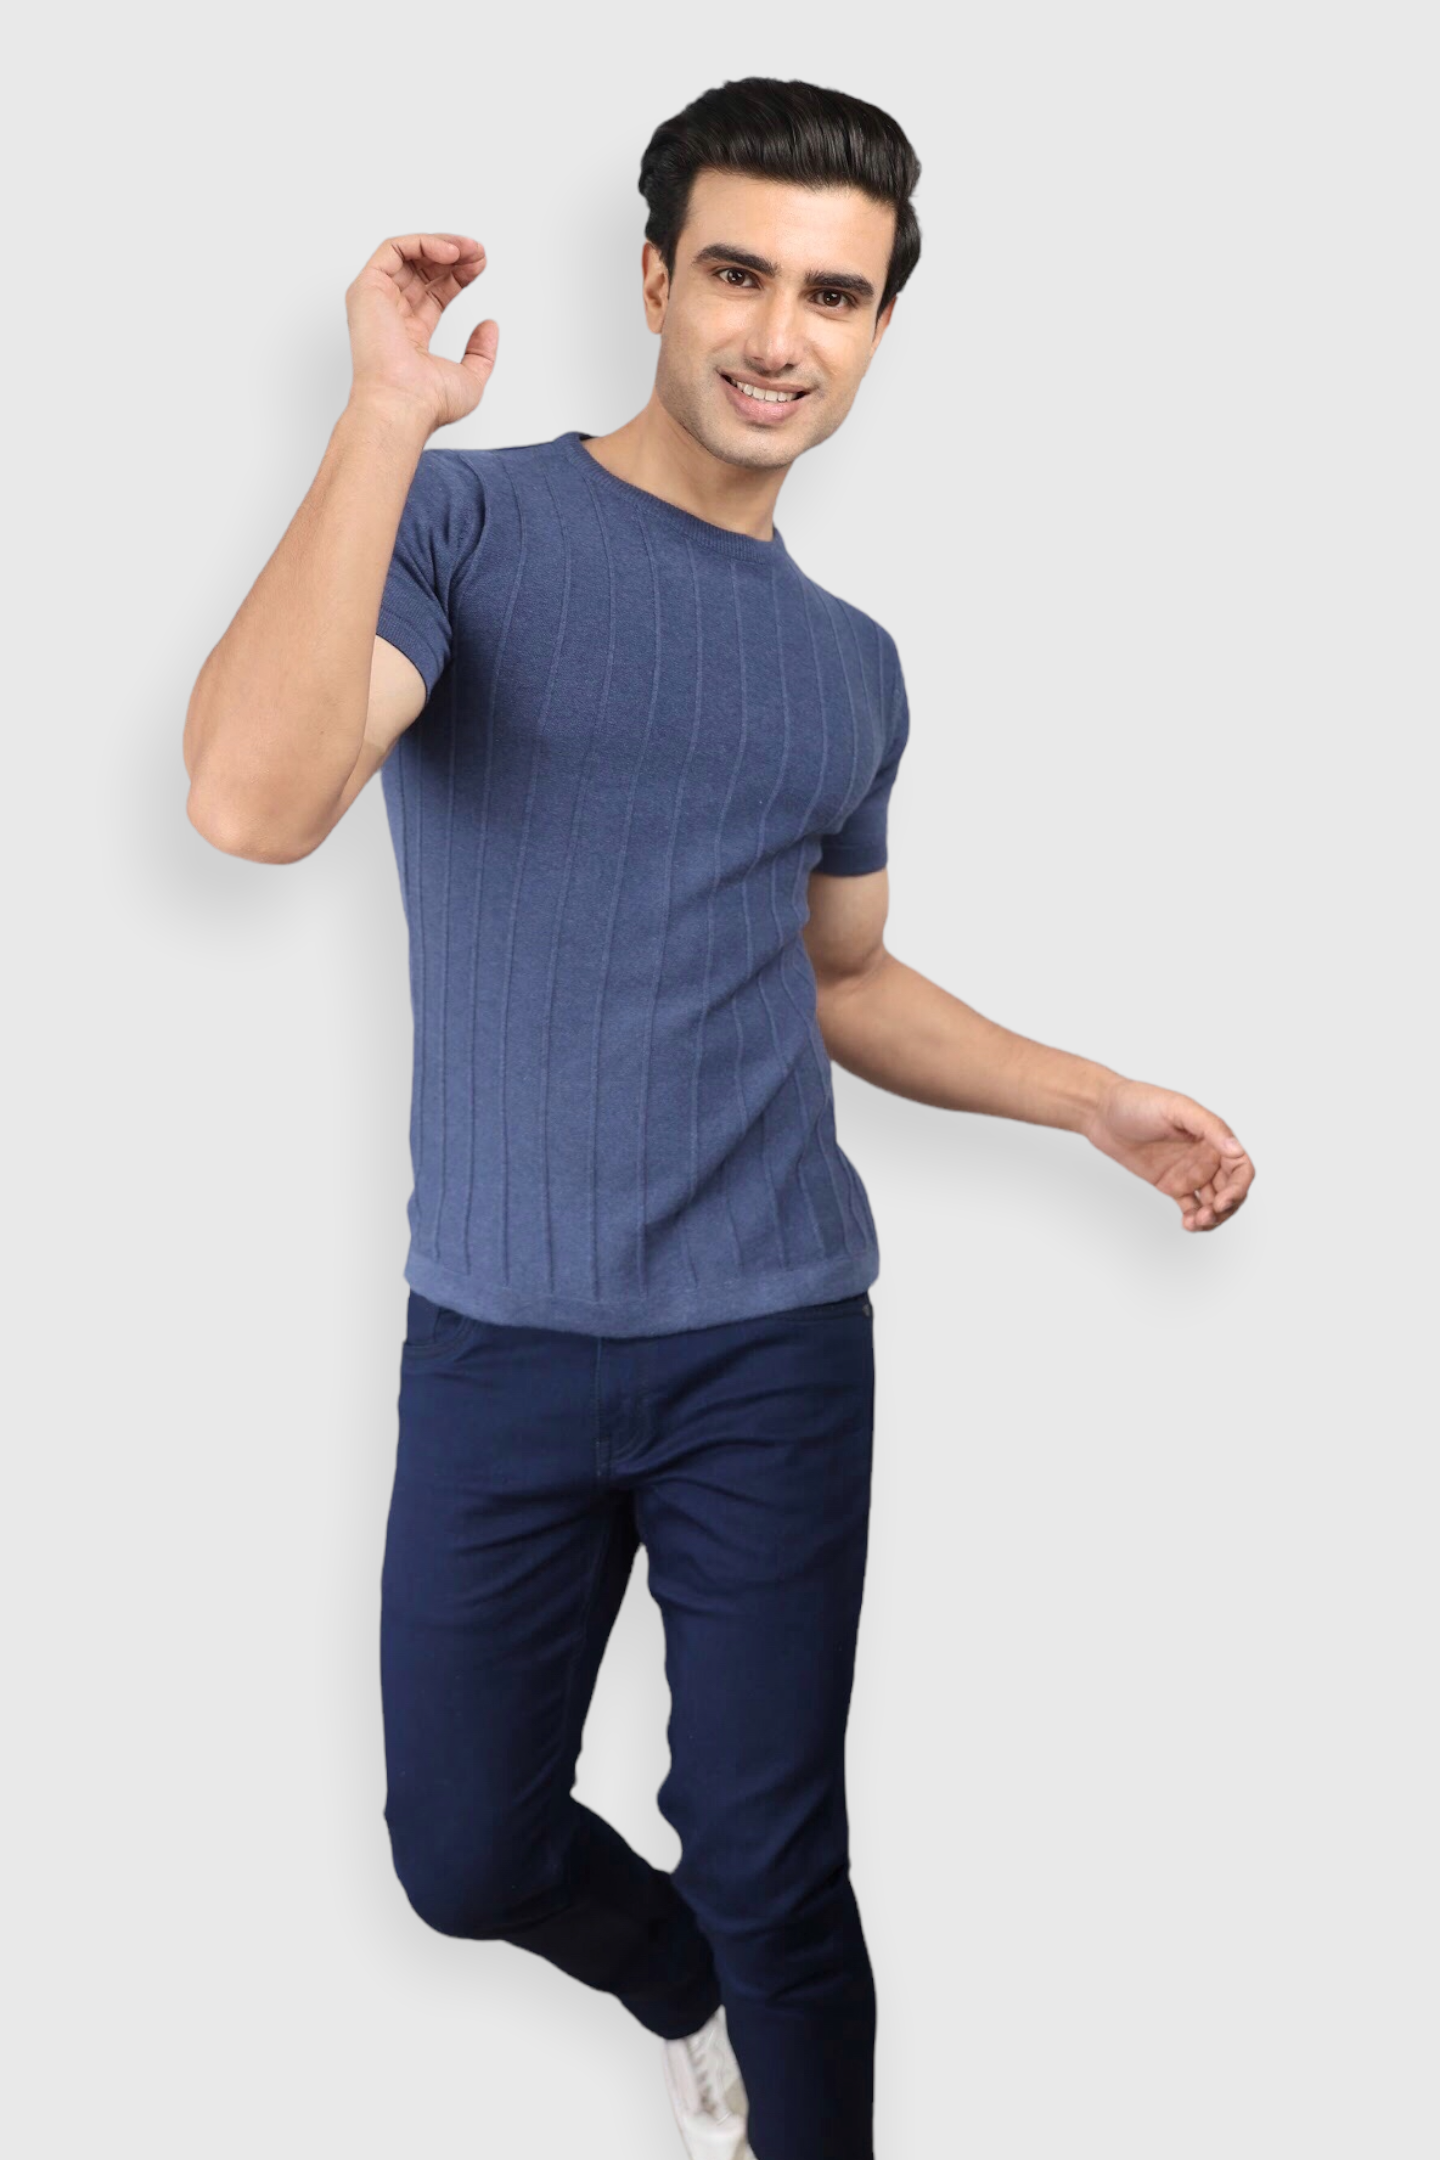 Airforce Blue Half Sleeve Flat Knit self striped Round neck T-Shirt for men